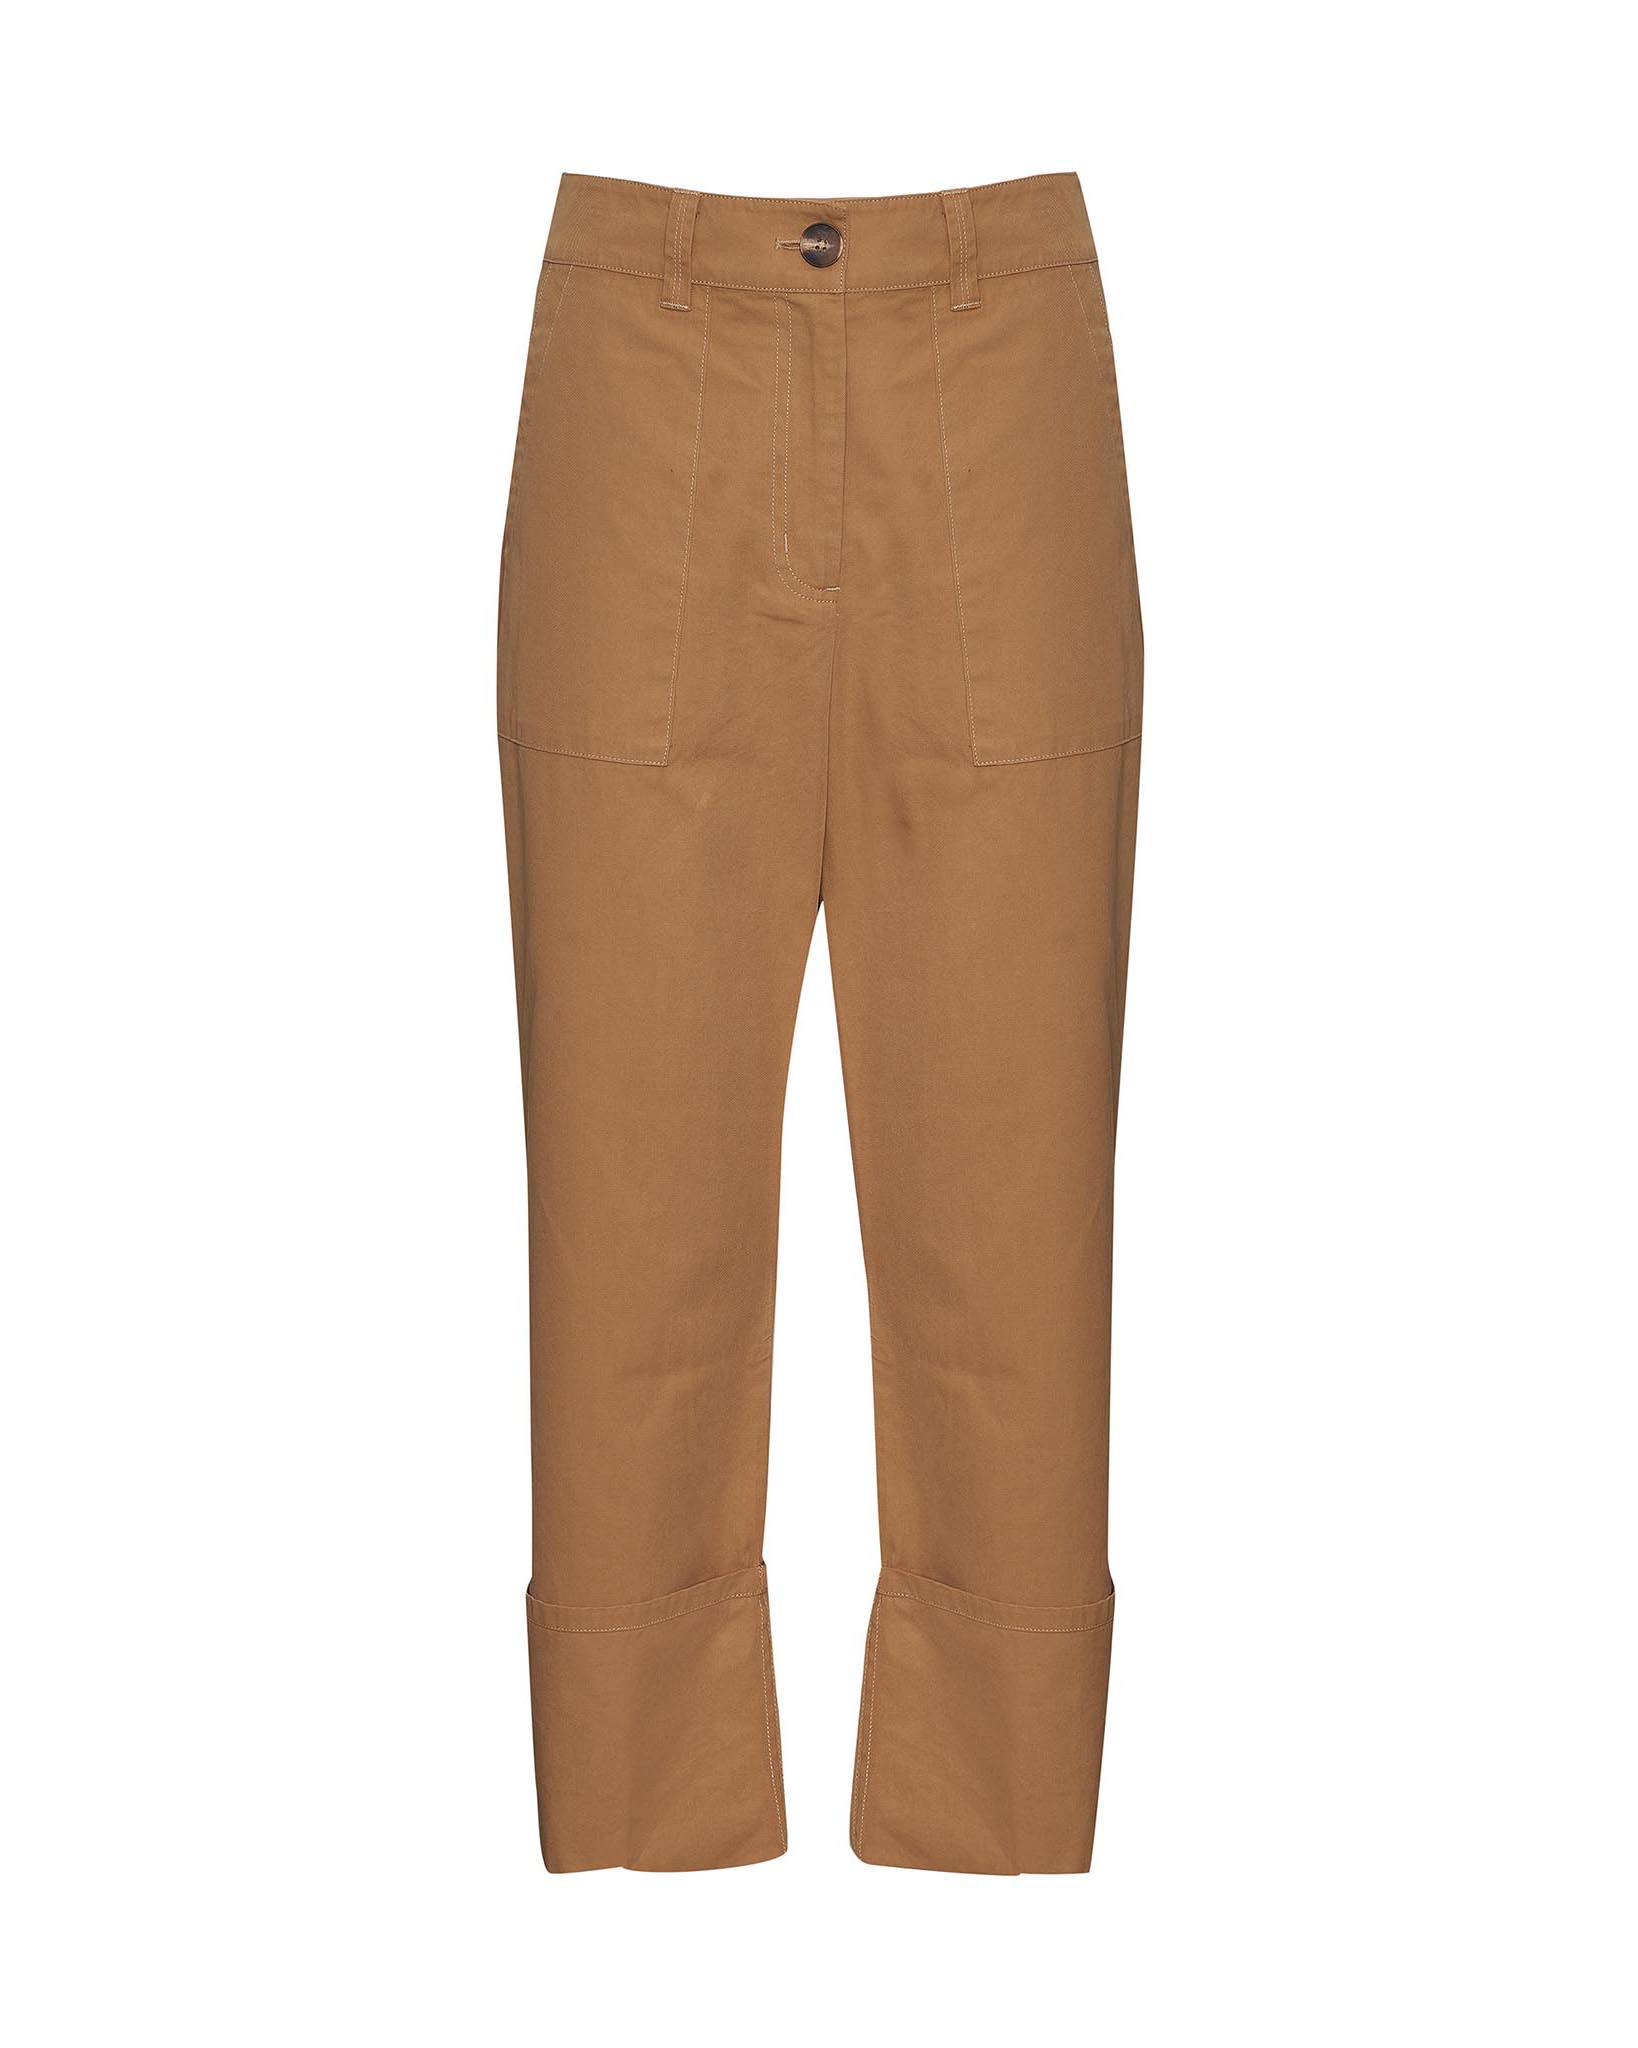 collective pant - camel